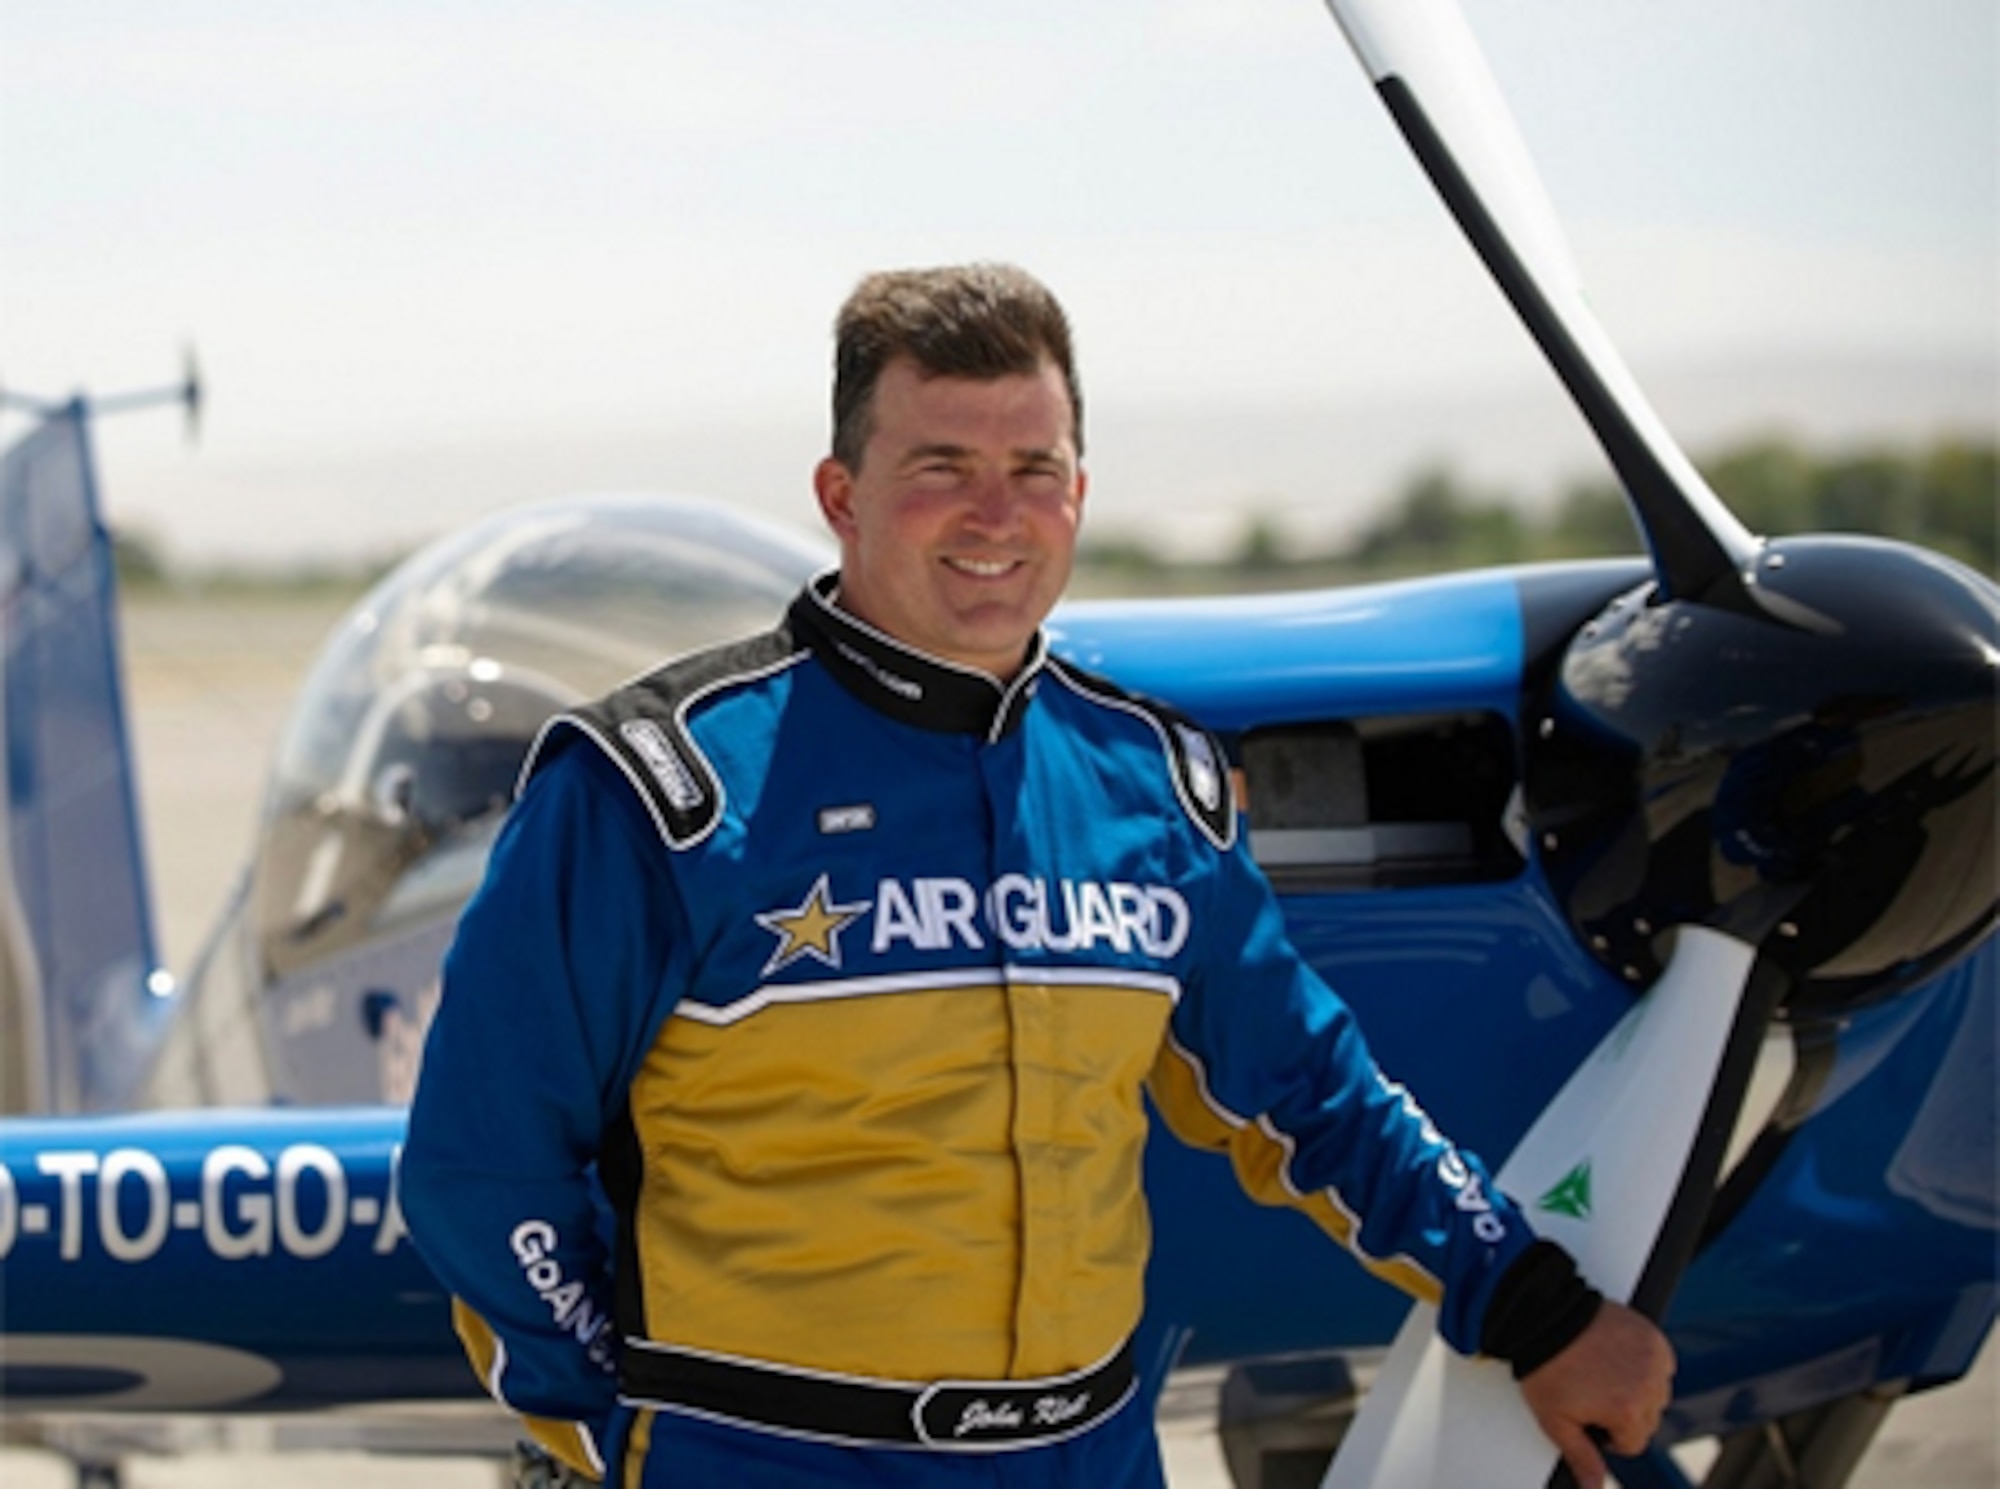 John Klatt will be performing at the 139th Airlift Wing Open House and Sound of Speed Air Show in St. Joseph, Mo., May 5-6, 2012. (Photo courtesy of John Klatt Air Shows.)